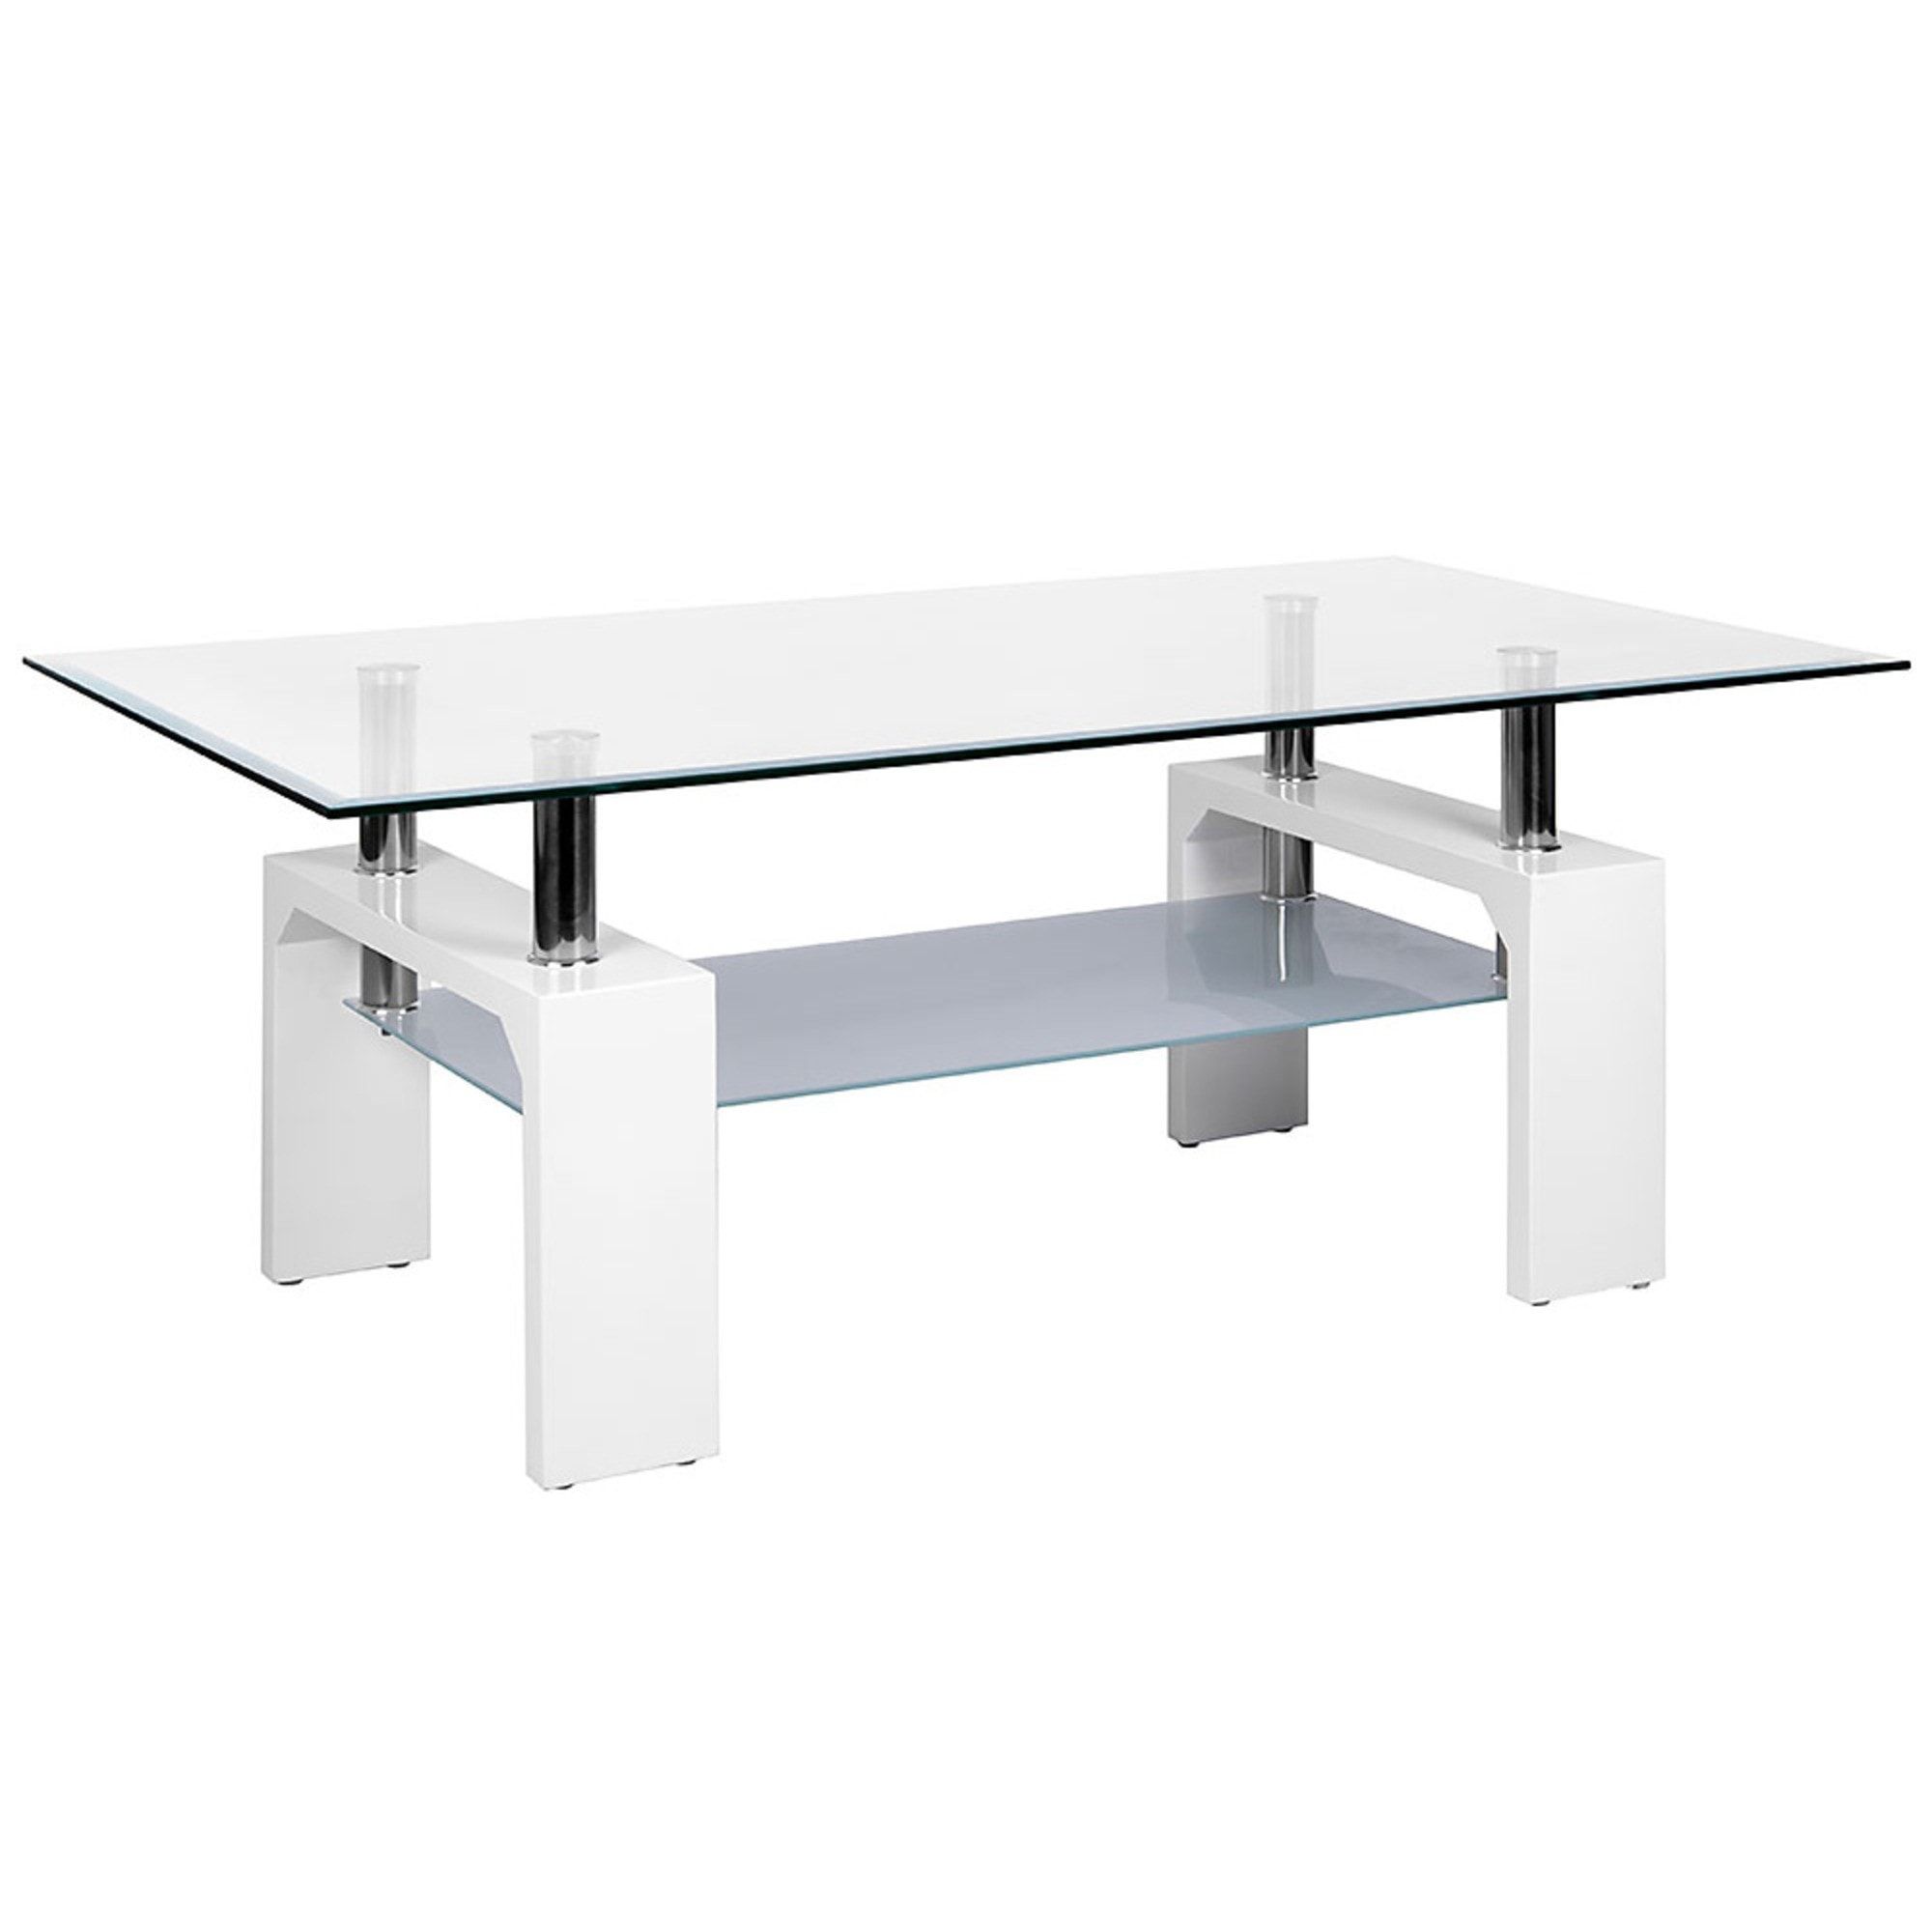 Elise Rectangular Clear Glass Coffee Table | Dining | Glass Furniture In Clear Rectangle Center Coffee Tables (View 5 of 20)